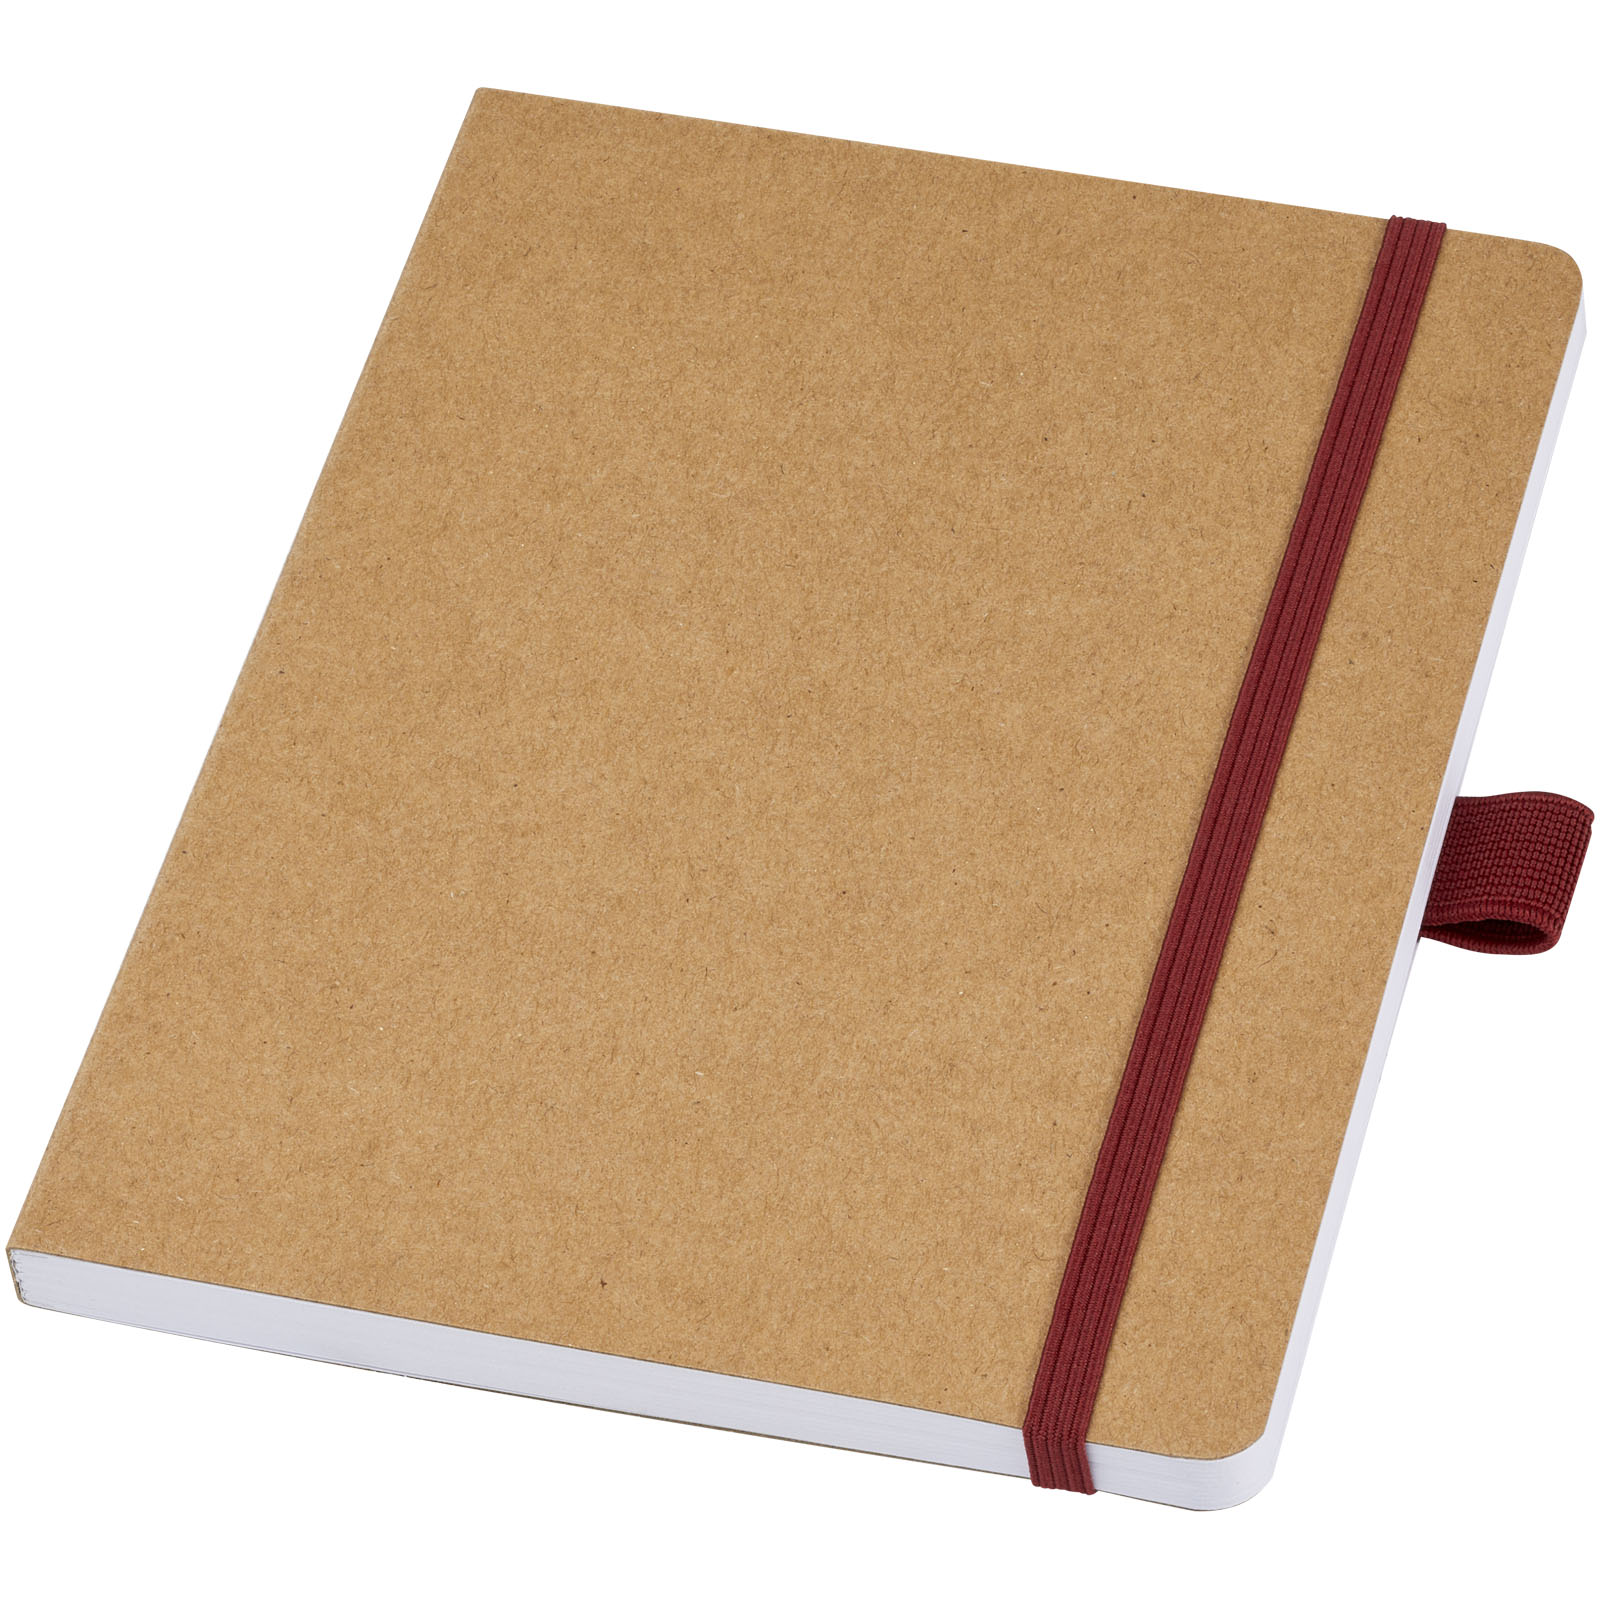 Advertising Soft cover notebooks - Berk recycled paper notebook - 0